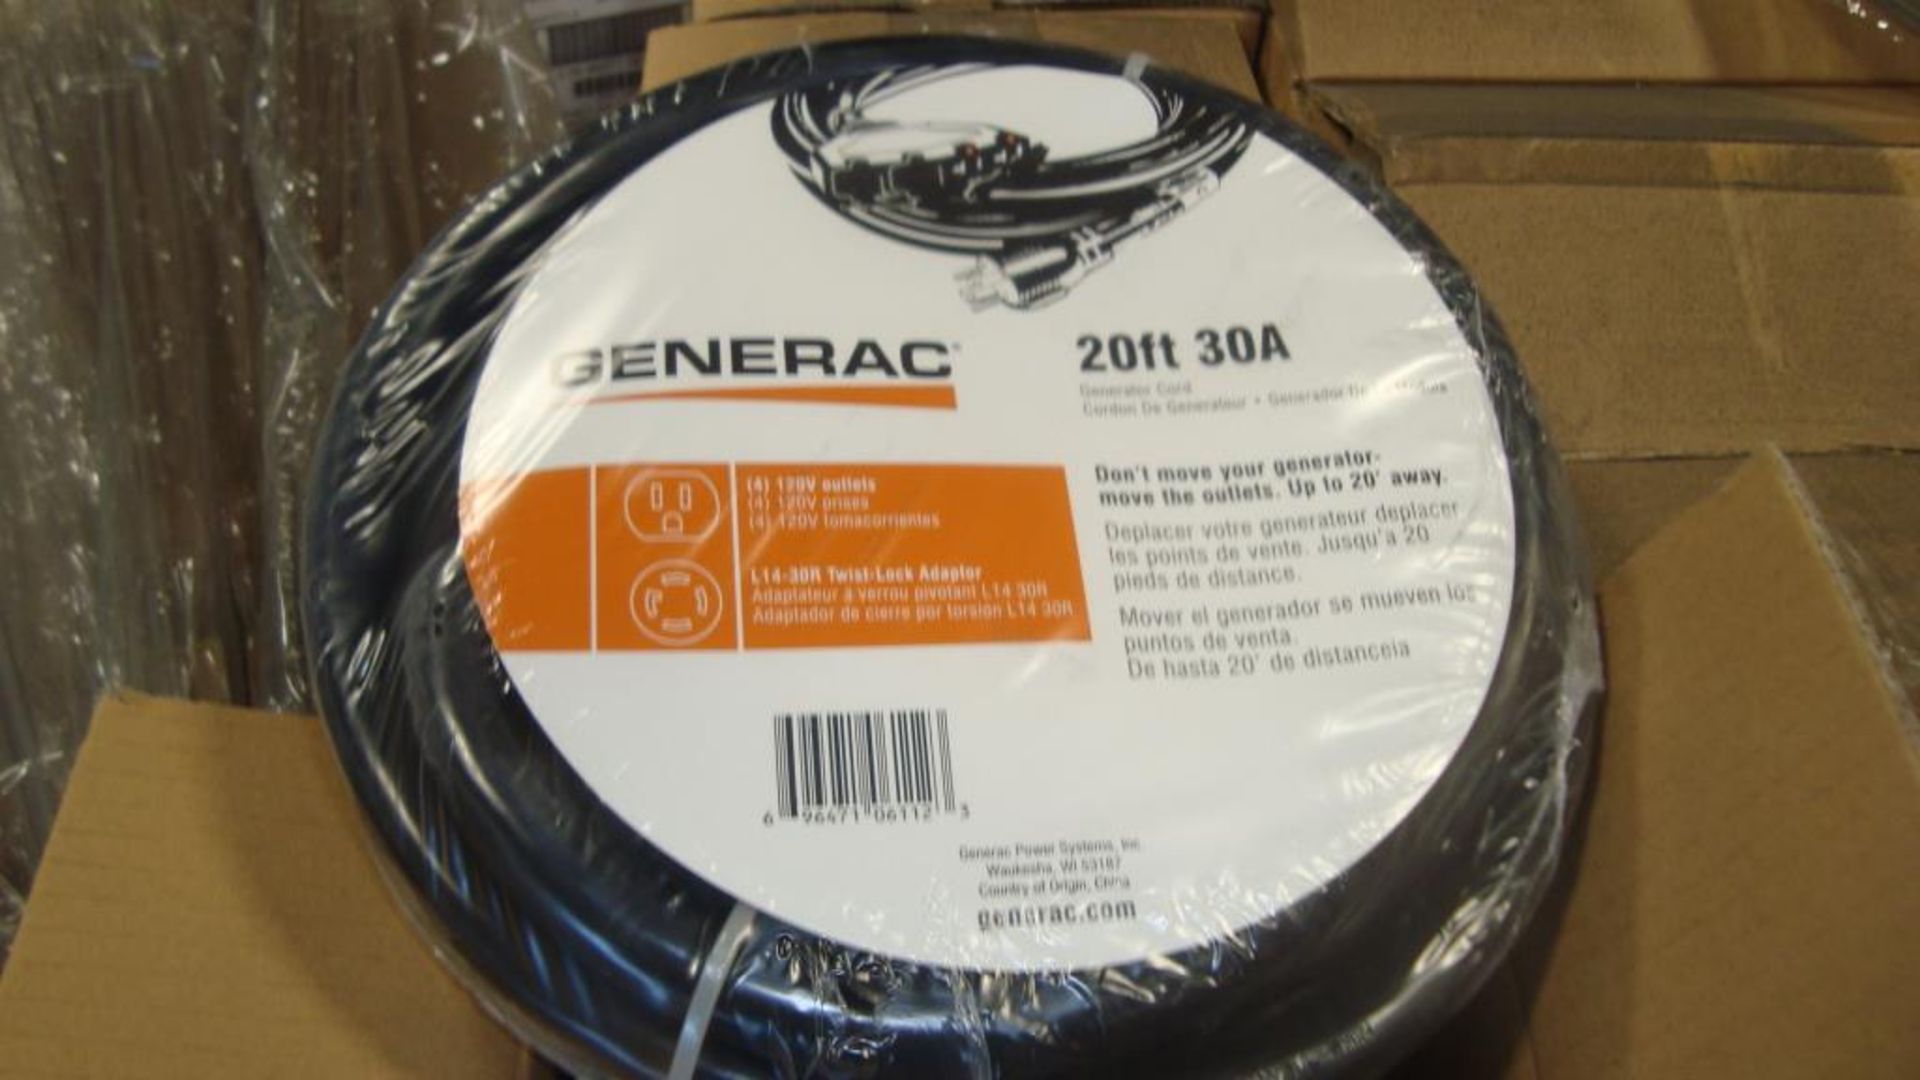 Extension Cords. Lot: 90 Total (45 Boxes- 2 ea.) Generac pn# 0061121-1 20ft, 30A Power - Image 2 of 8